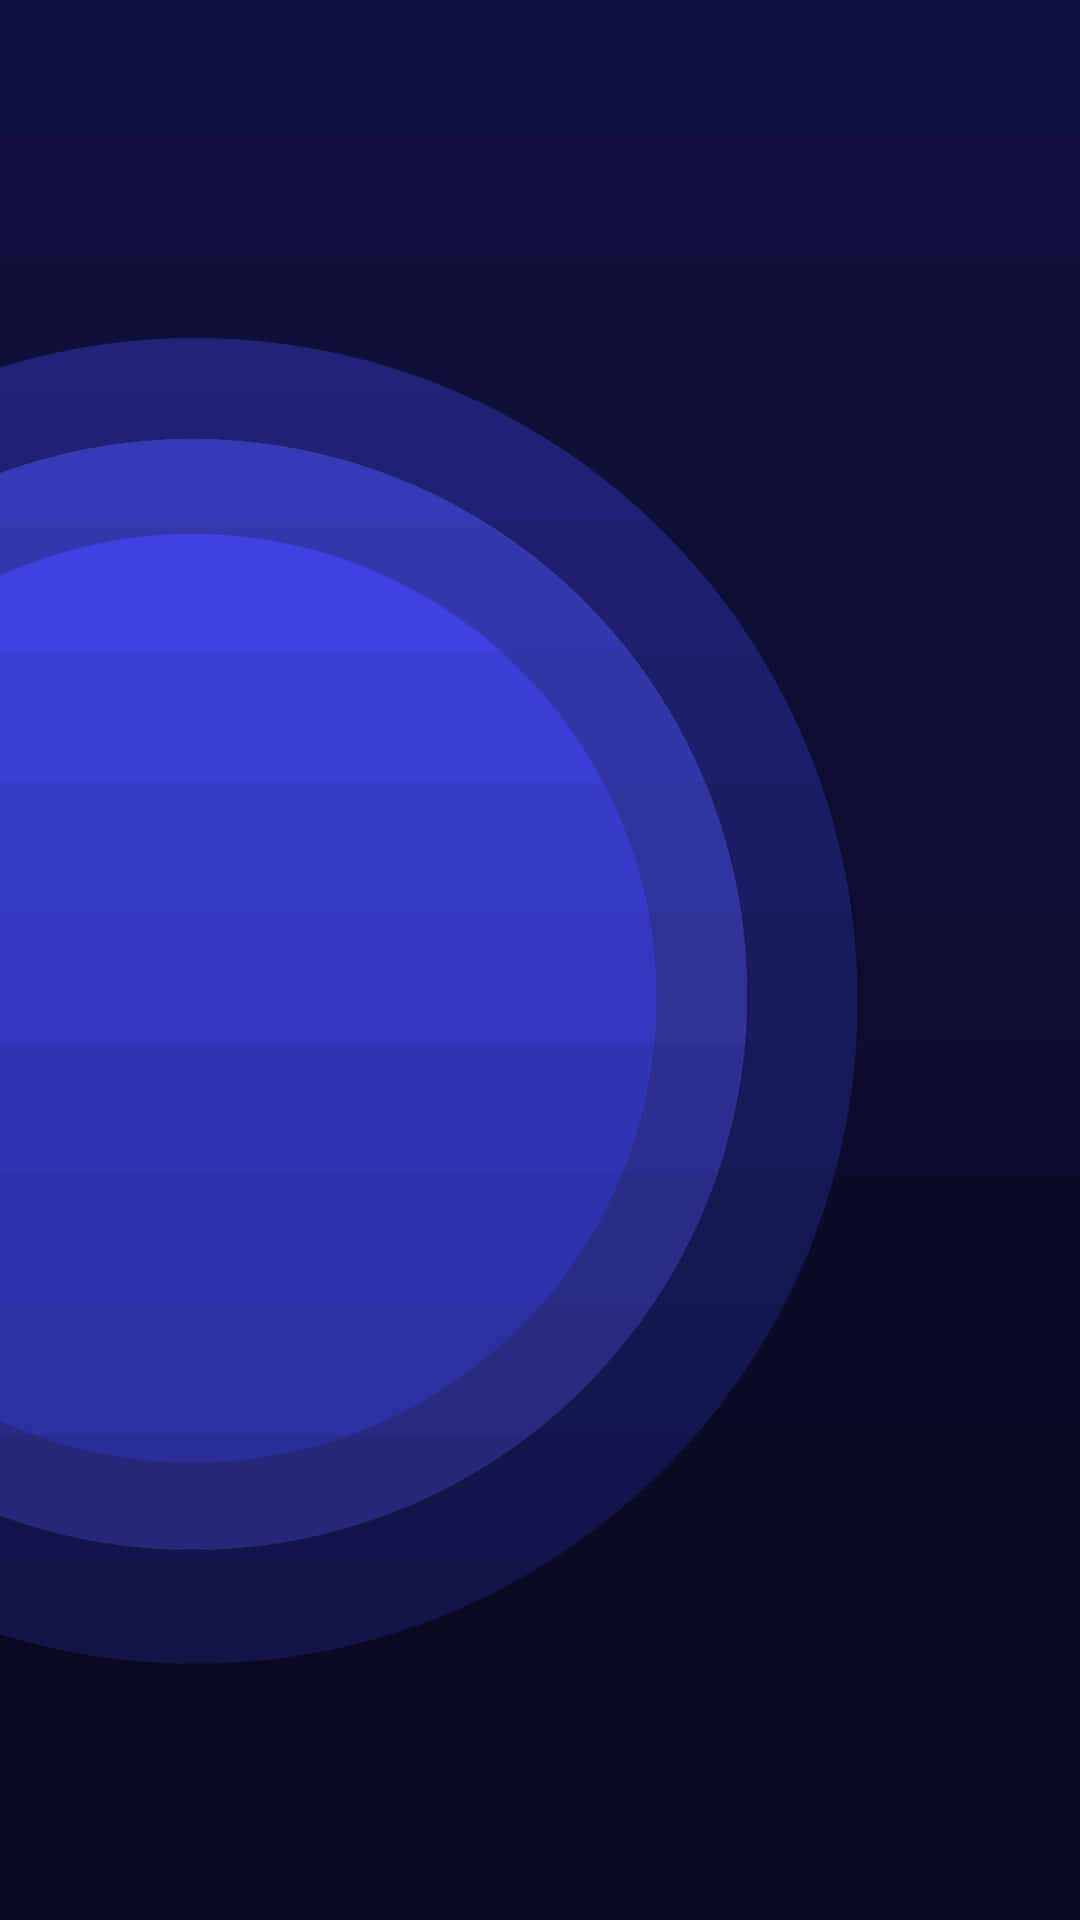 Style your backgrounds with Radial